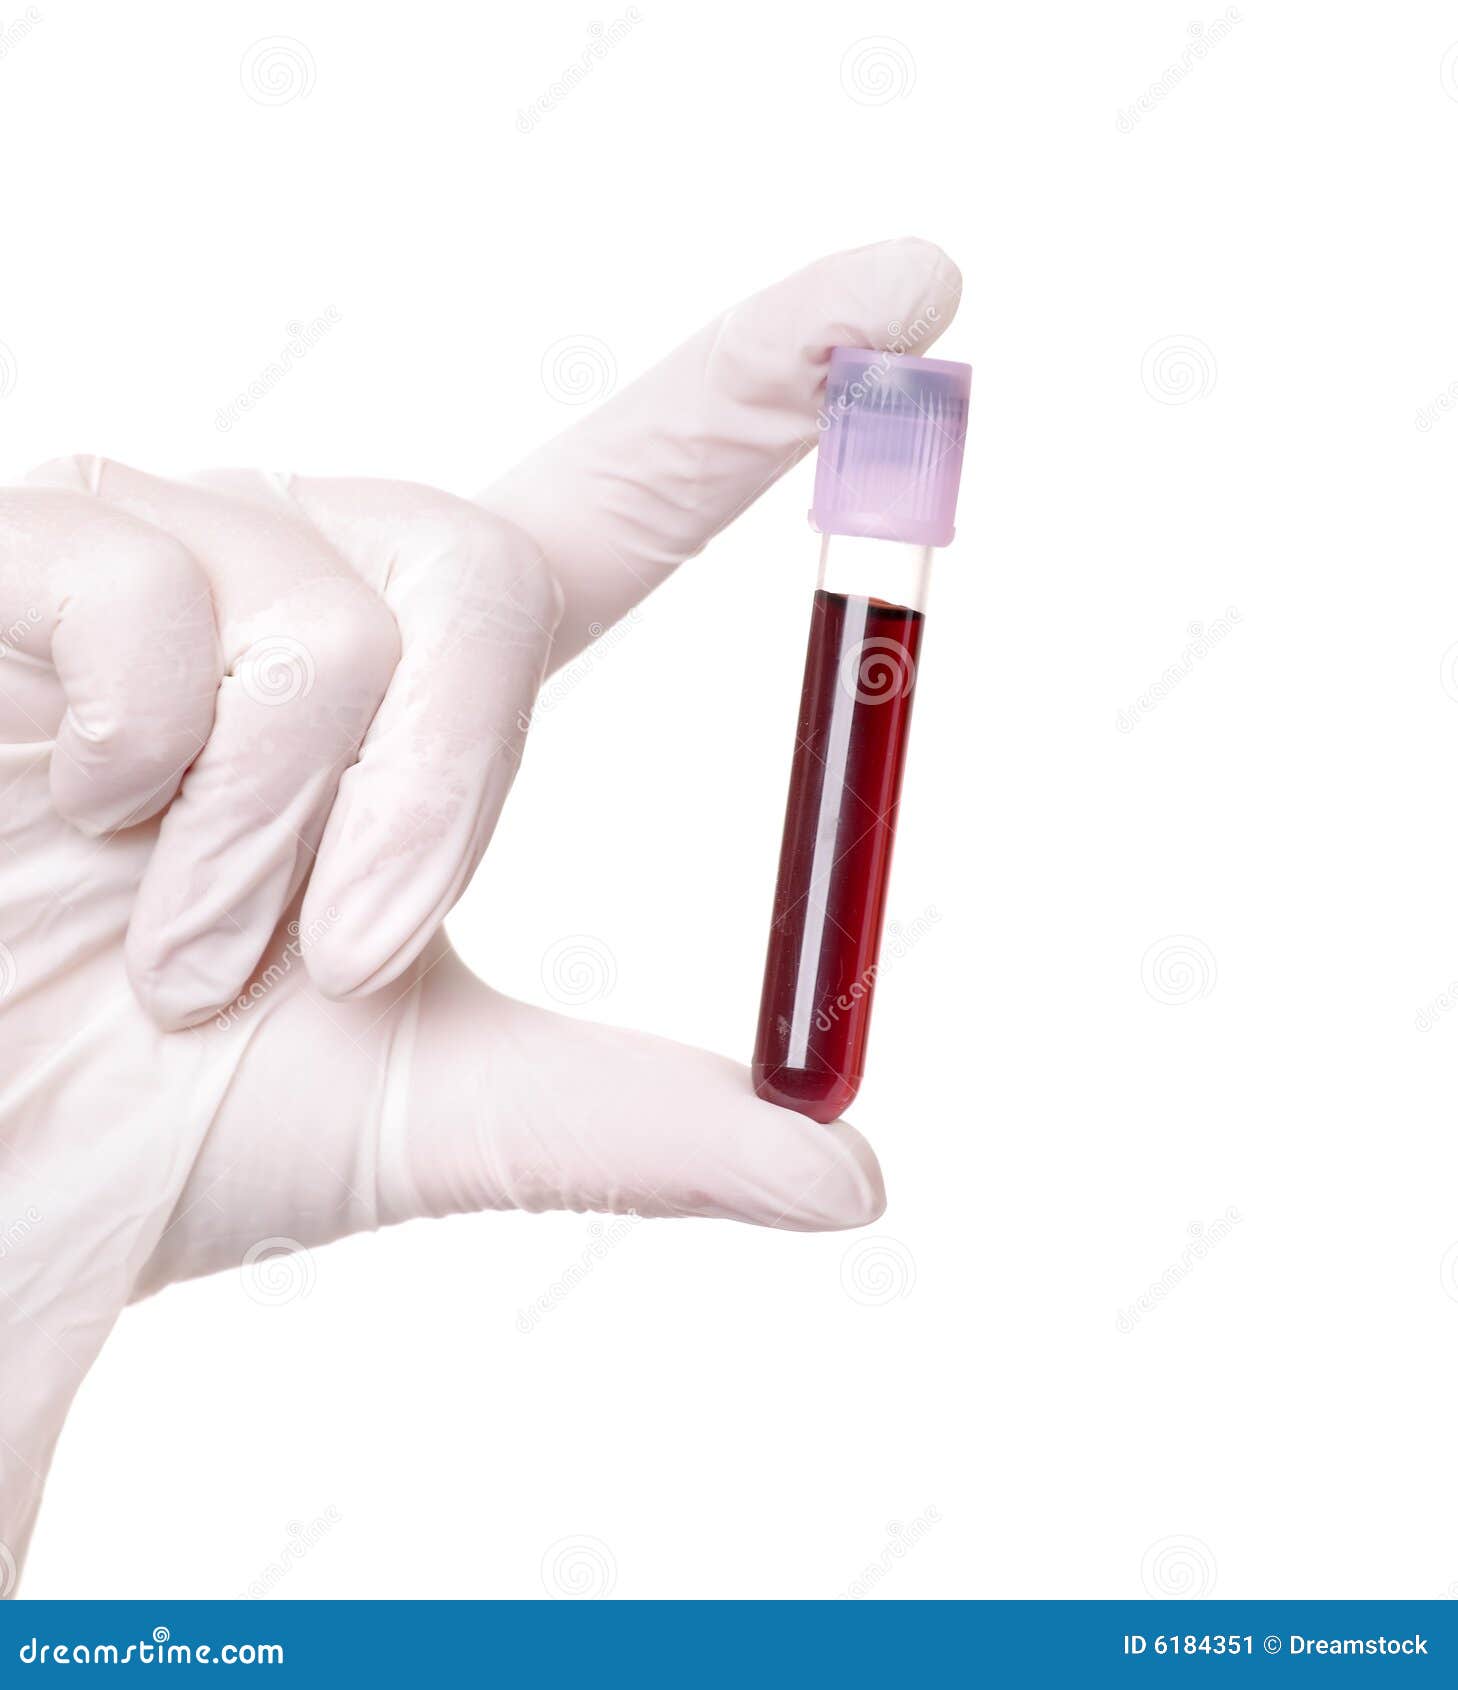 clipart blood sample - photo #5